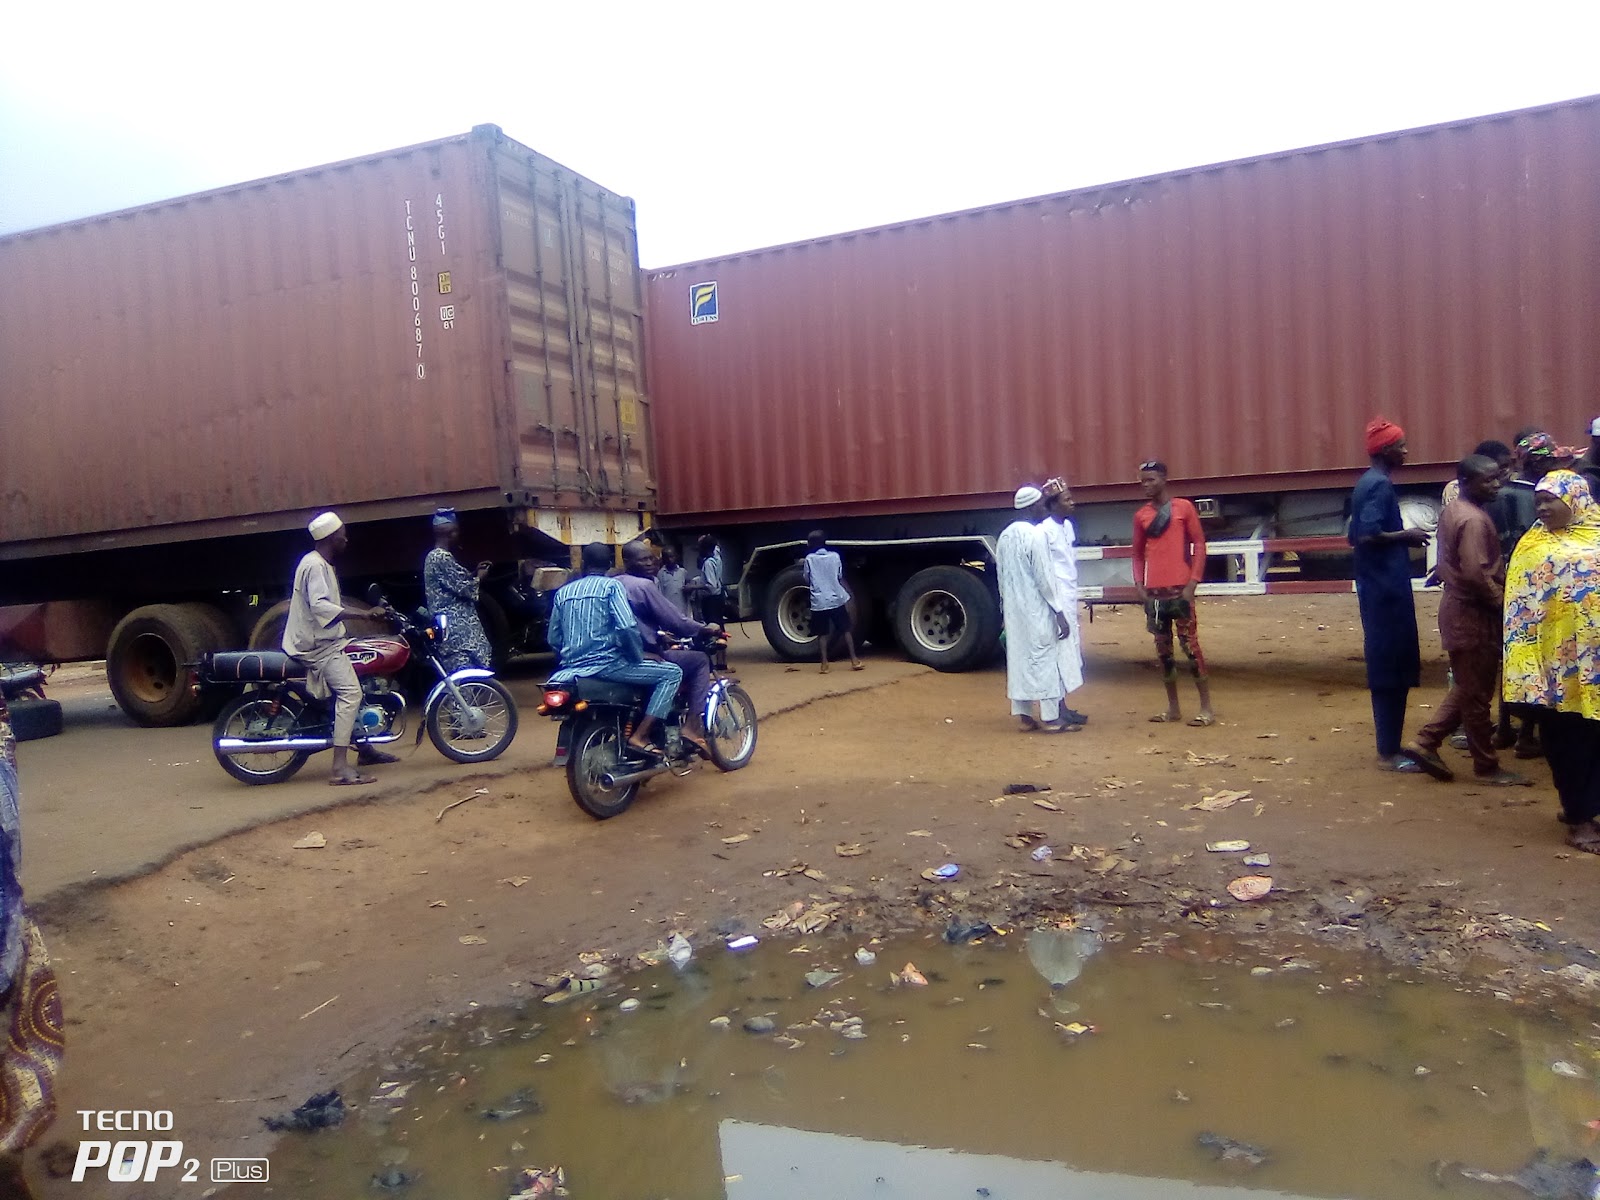 How Open Defecation By Truck Driver Ignited Gridlock, Tension On Niger Highway 2